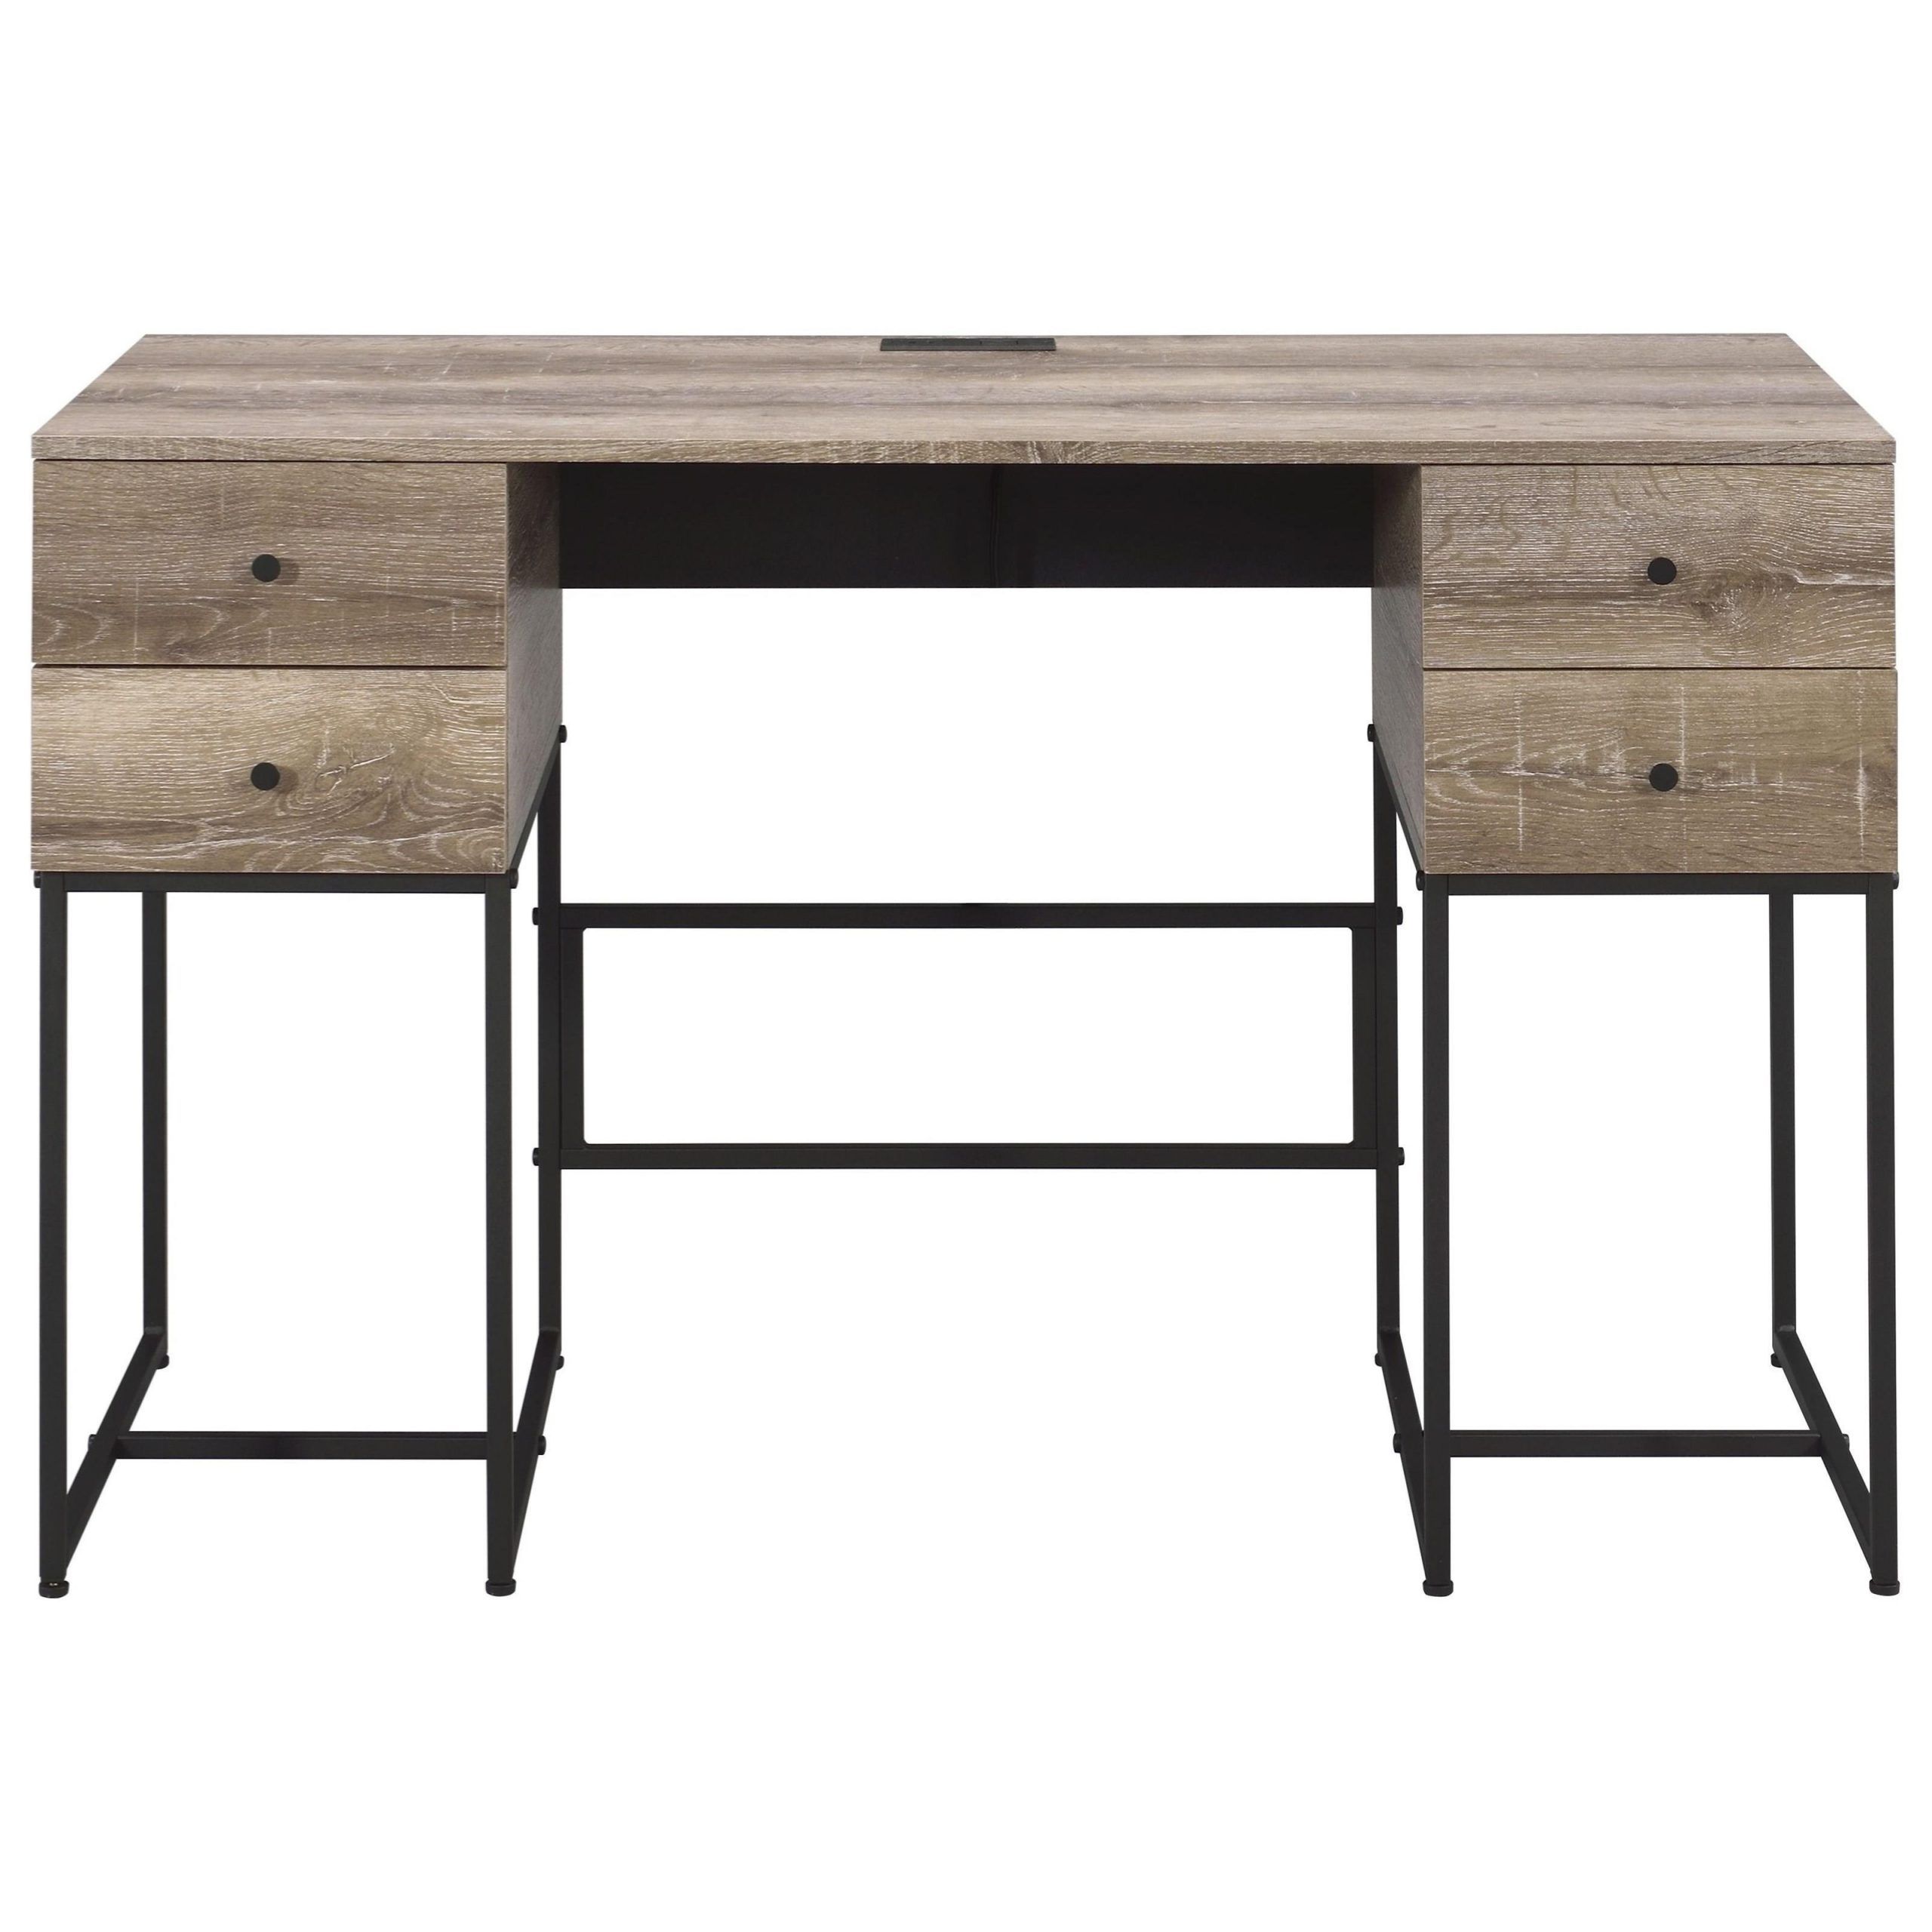 Acme Furniture Desirre Rustic Industrial 4 Drawer Desk With Usb Ports Inside Current Acacia Wood Writing Desks With Usb Ports (View 10 of 15)